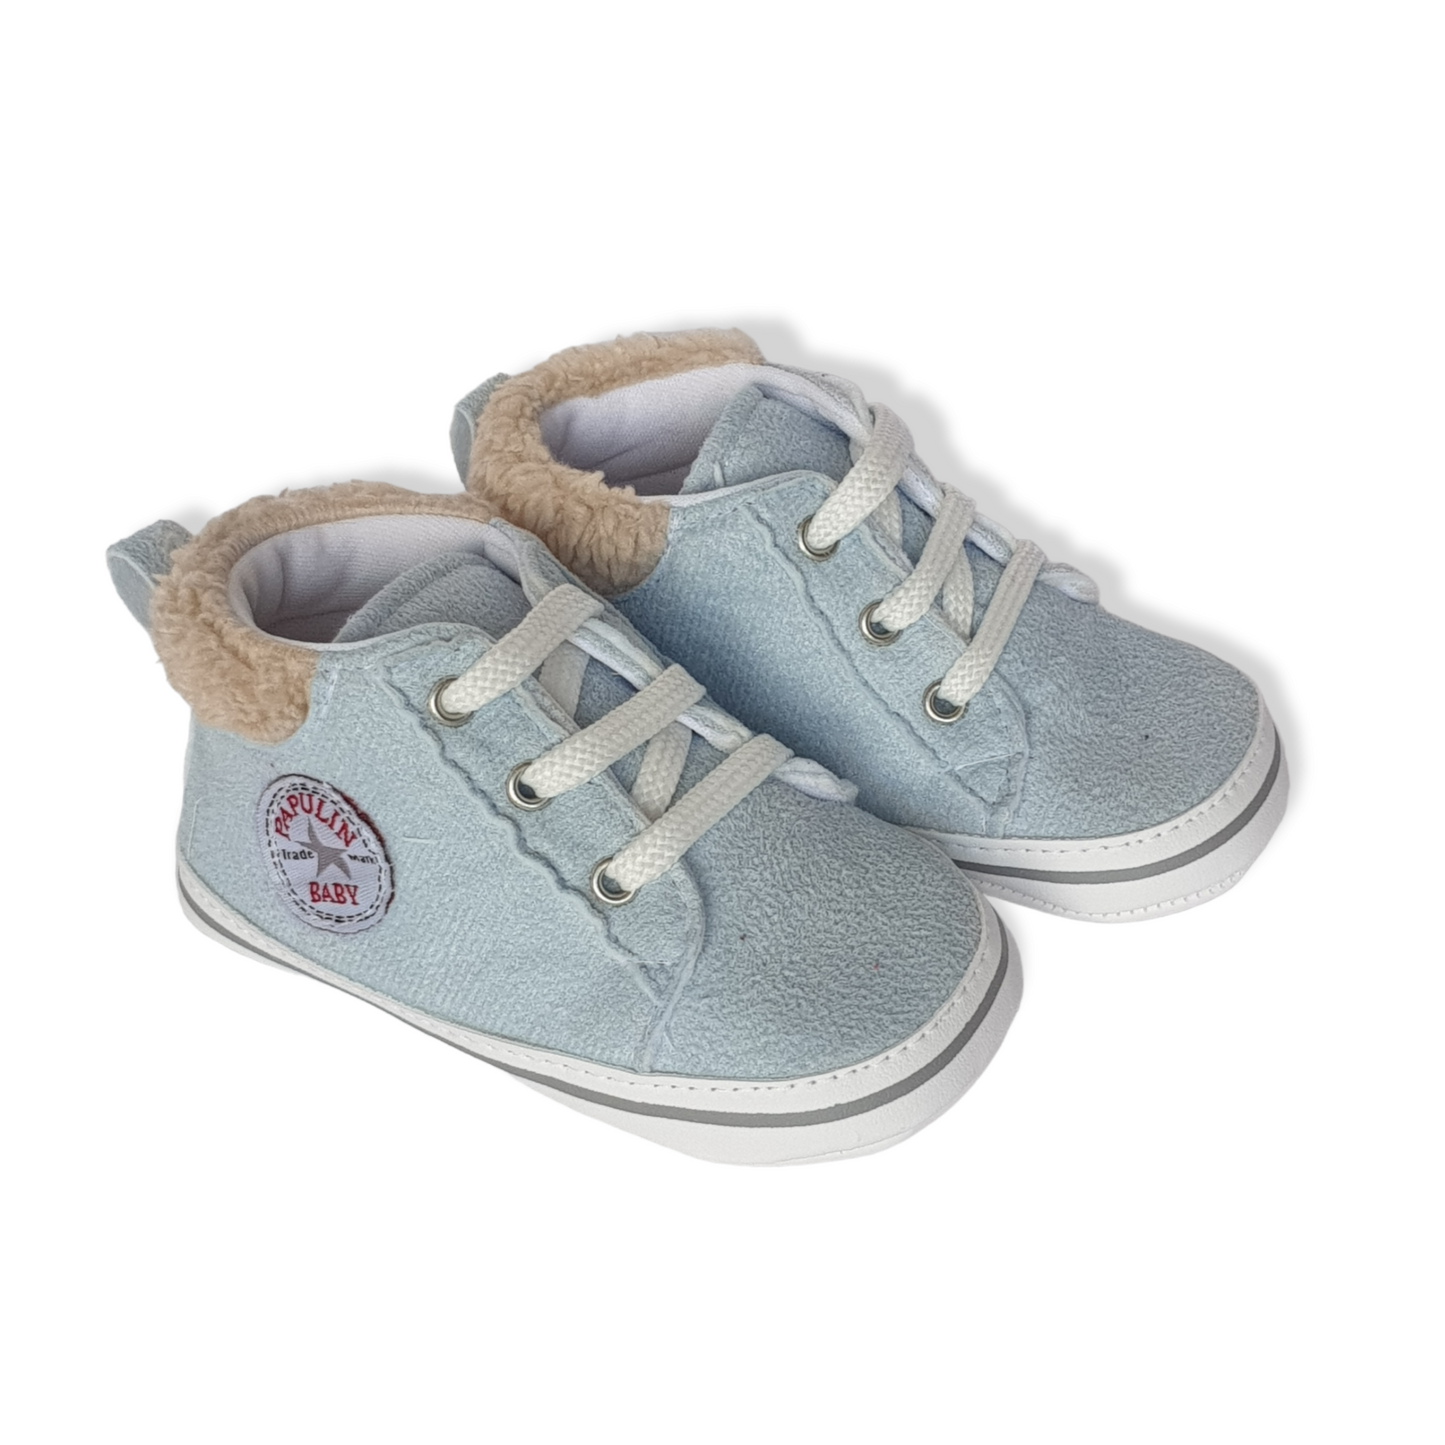 Ligh Blue Sneakers Baby Shoes